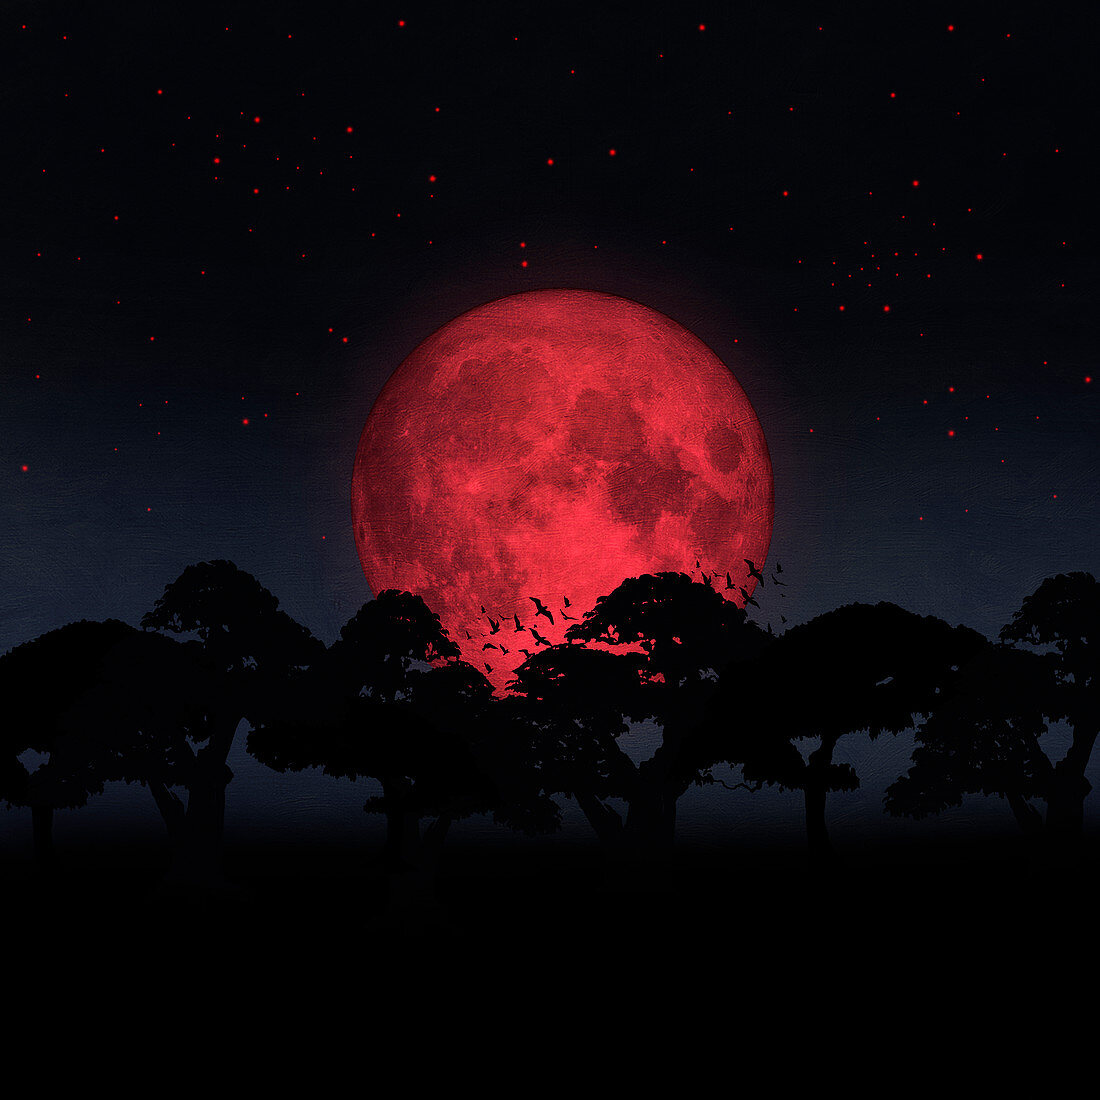 Trees silhouetted by huge red moon, illustration